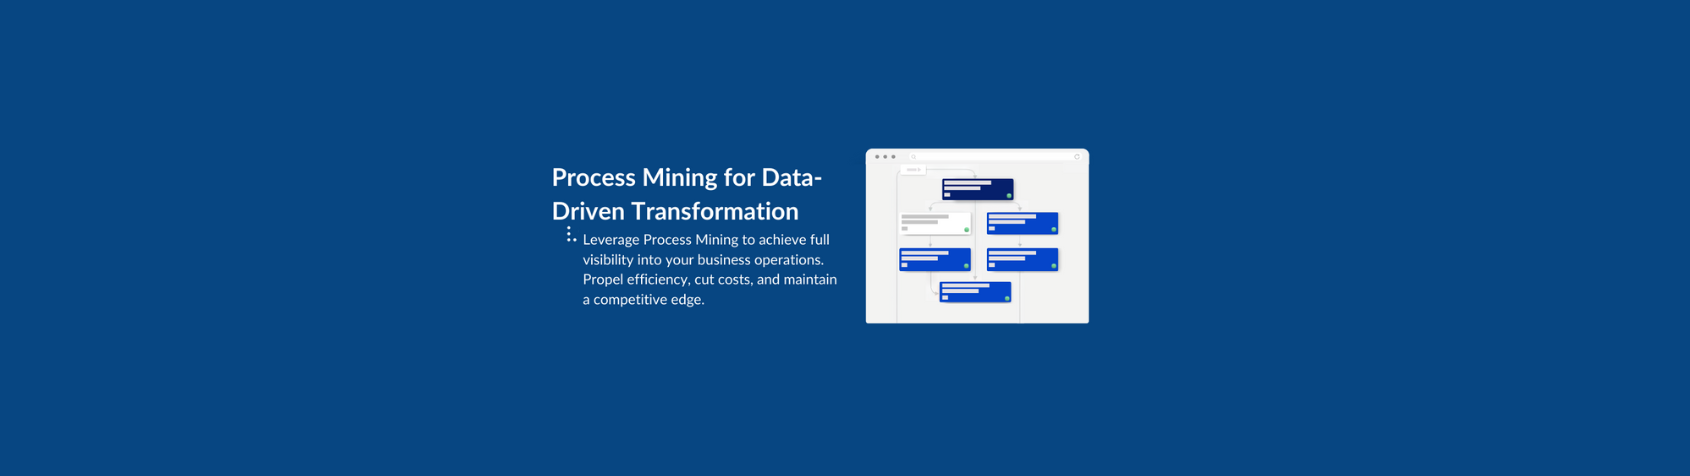 Process mining solutions